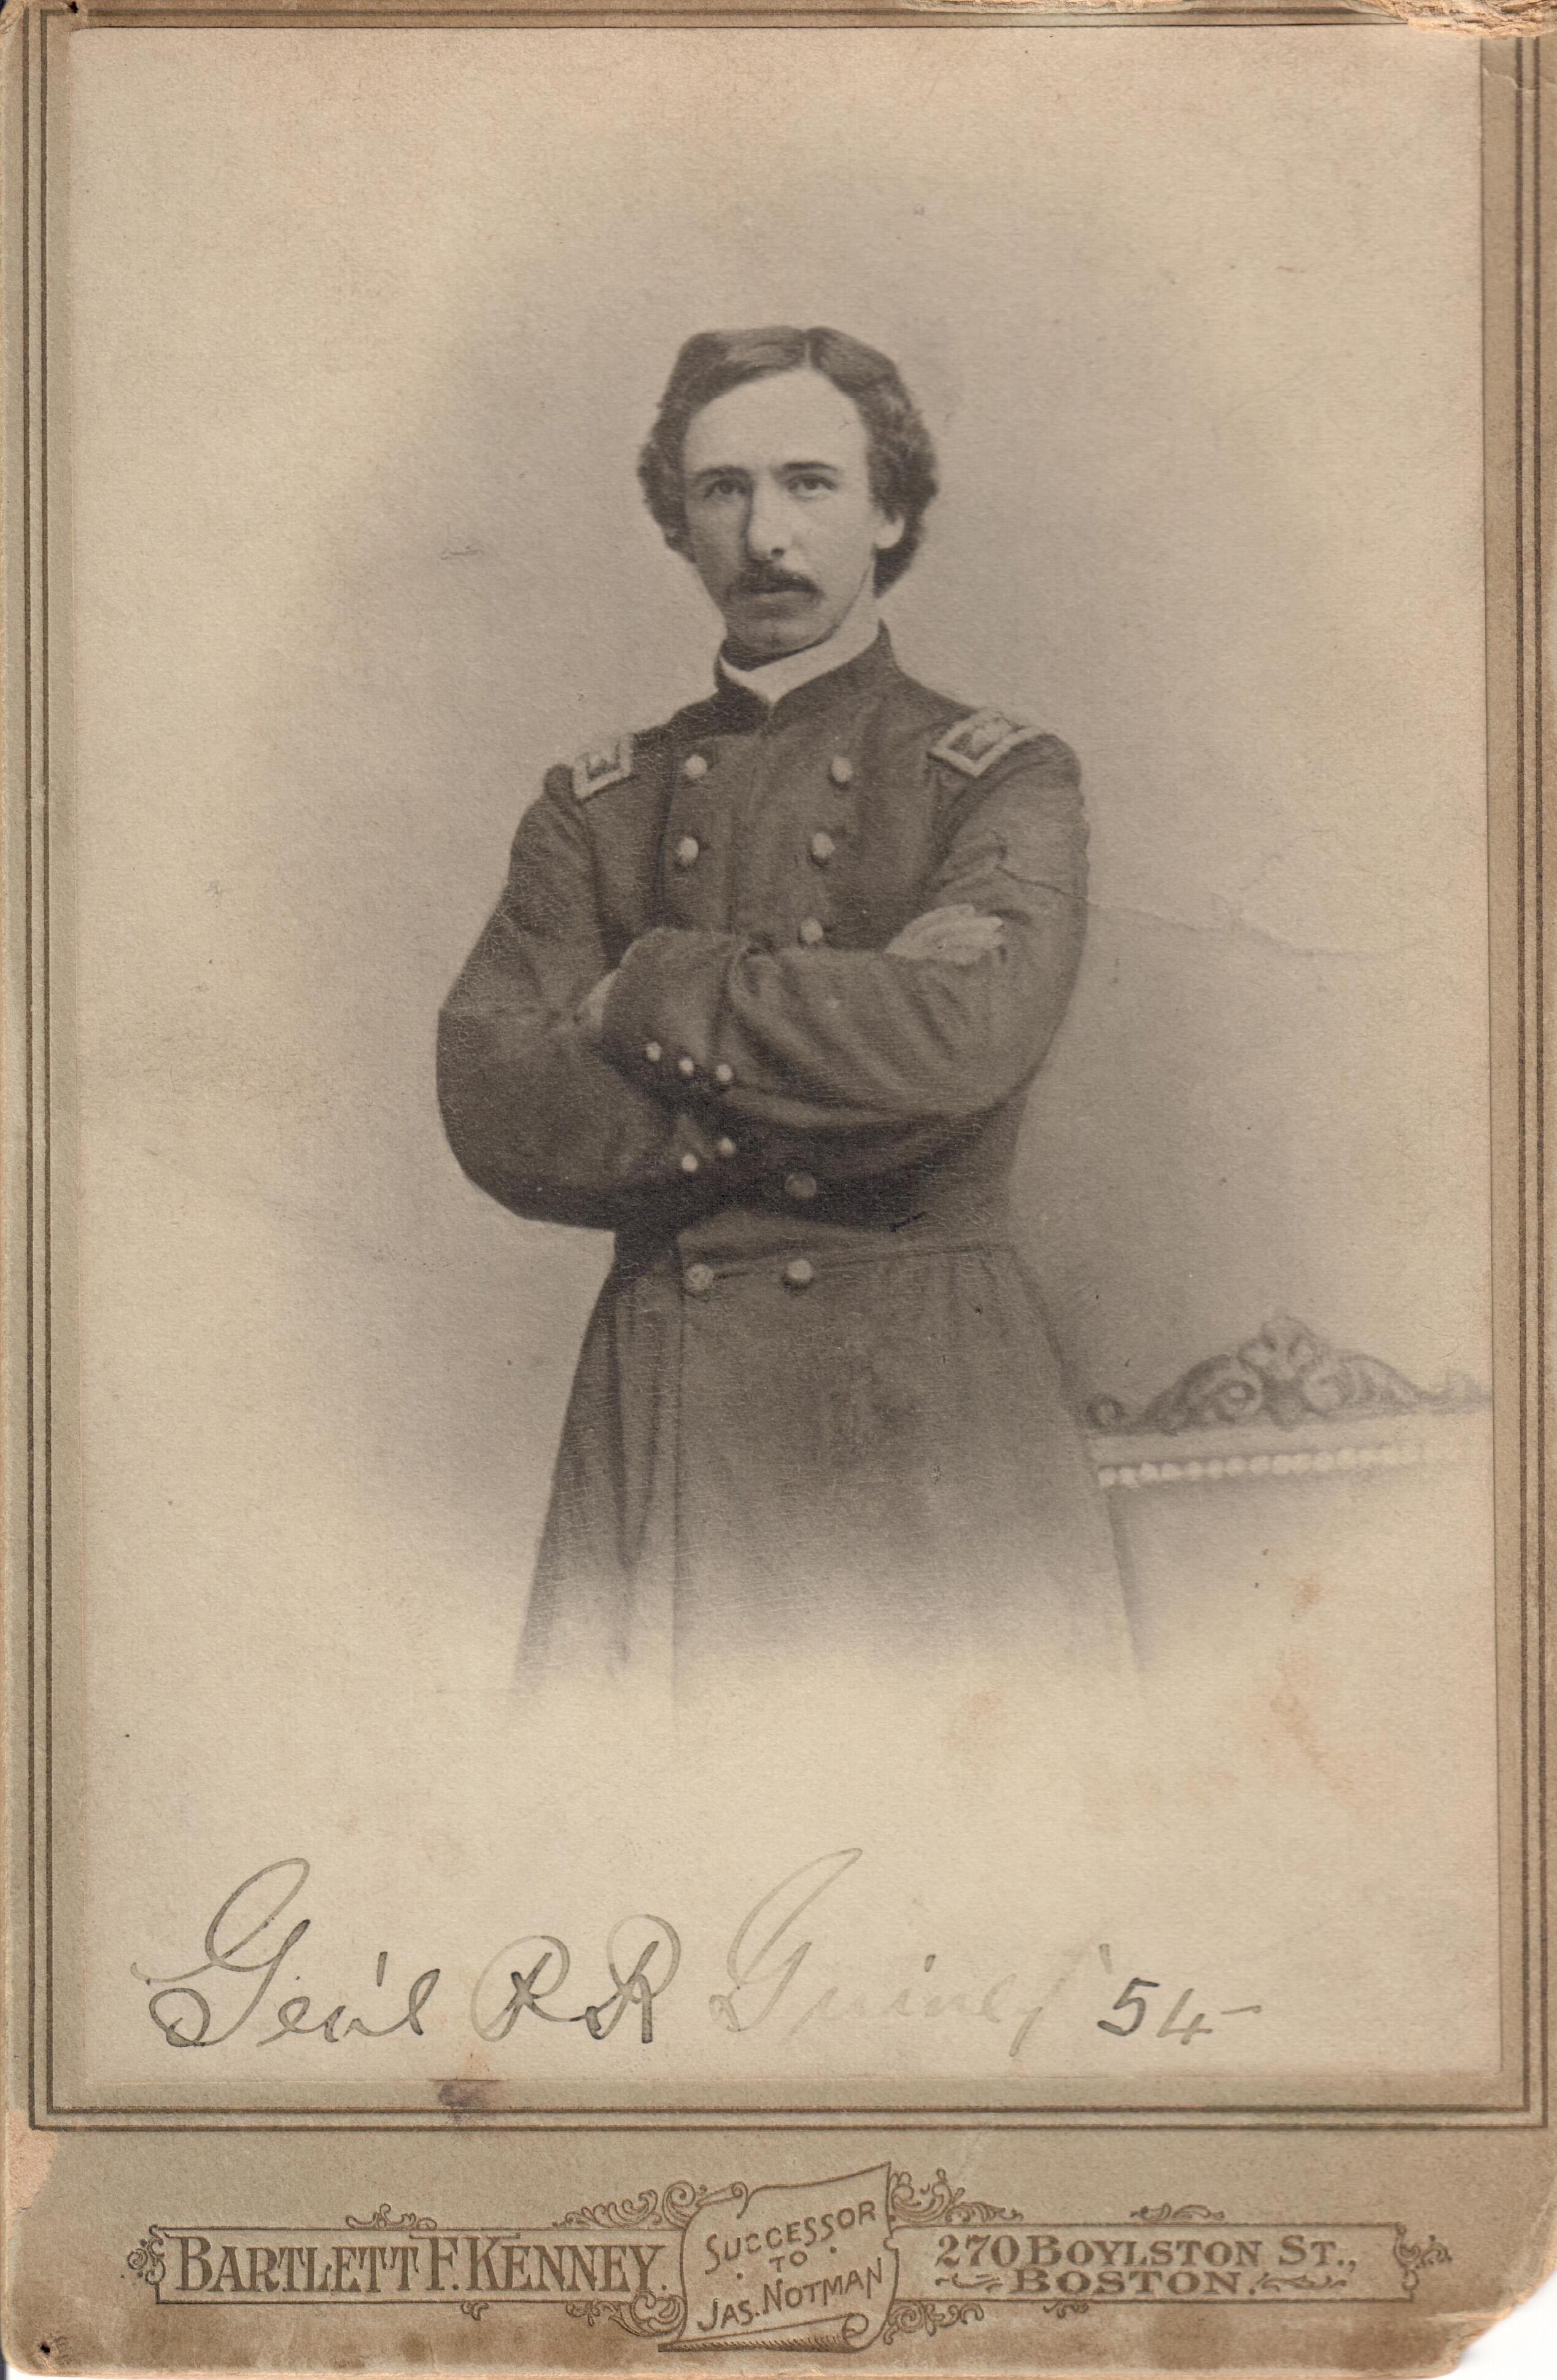 A Union officer poses, arms crossed, in his uniform and mustache. Gen’l P.R. Guiney 54 is handwritten on the card. 